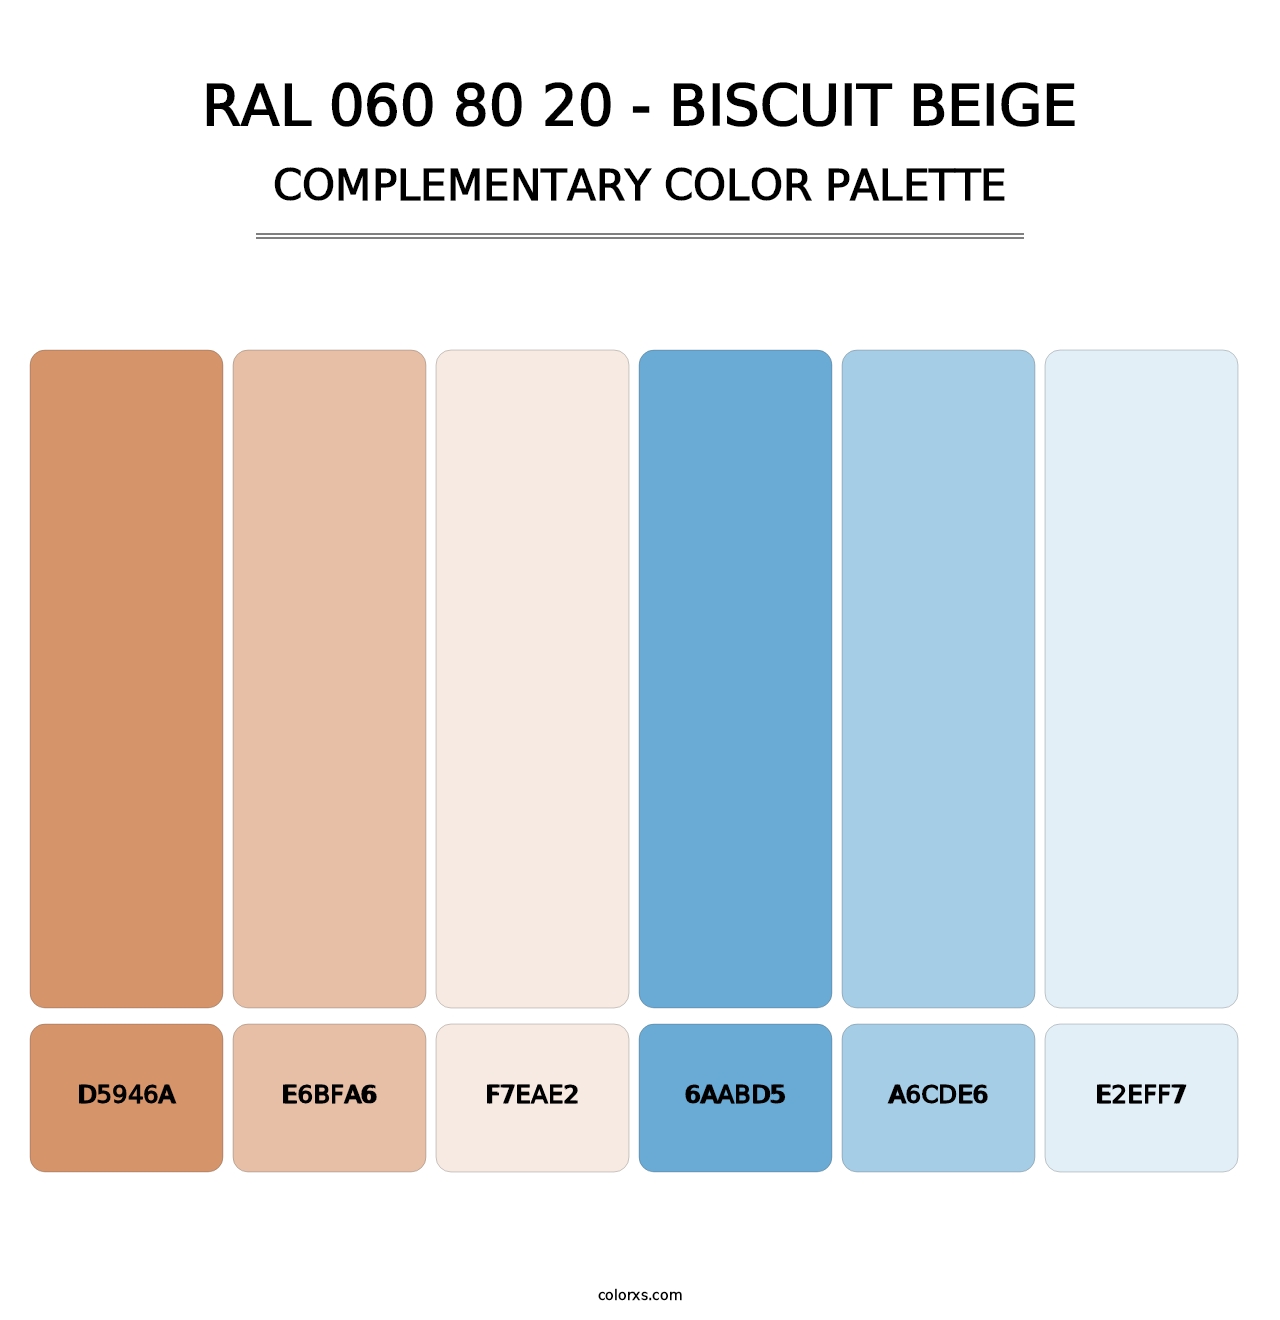 RAL 060 80 20 - Biscuit Beige - Complementary Color Palette